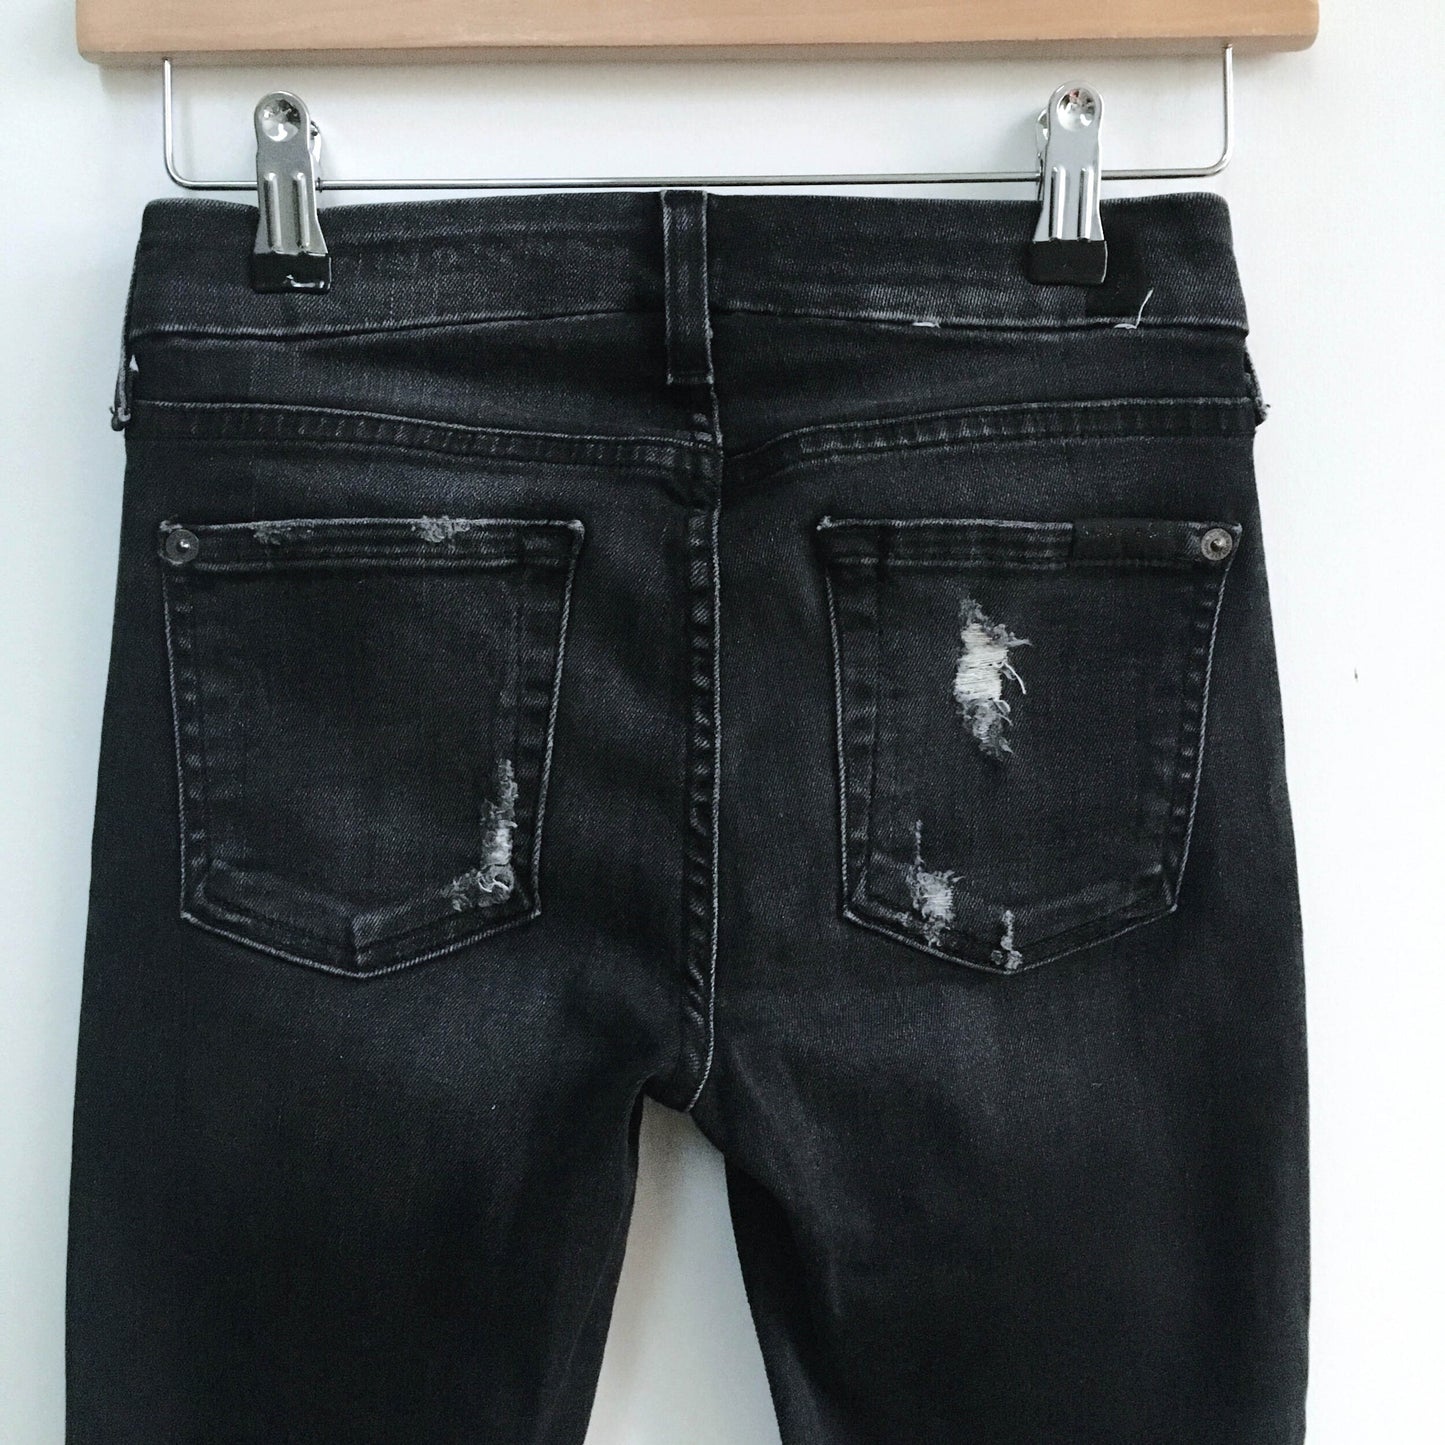 7 for all mankind the Skinny - size 23